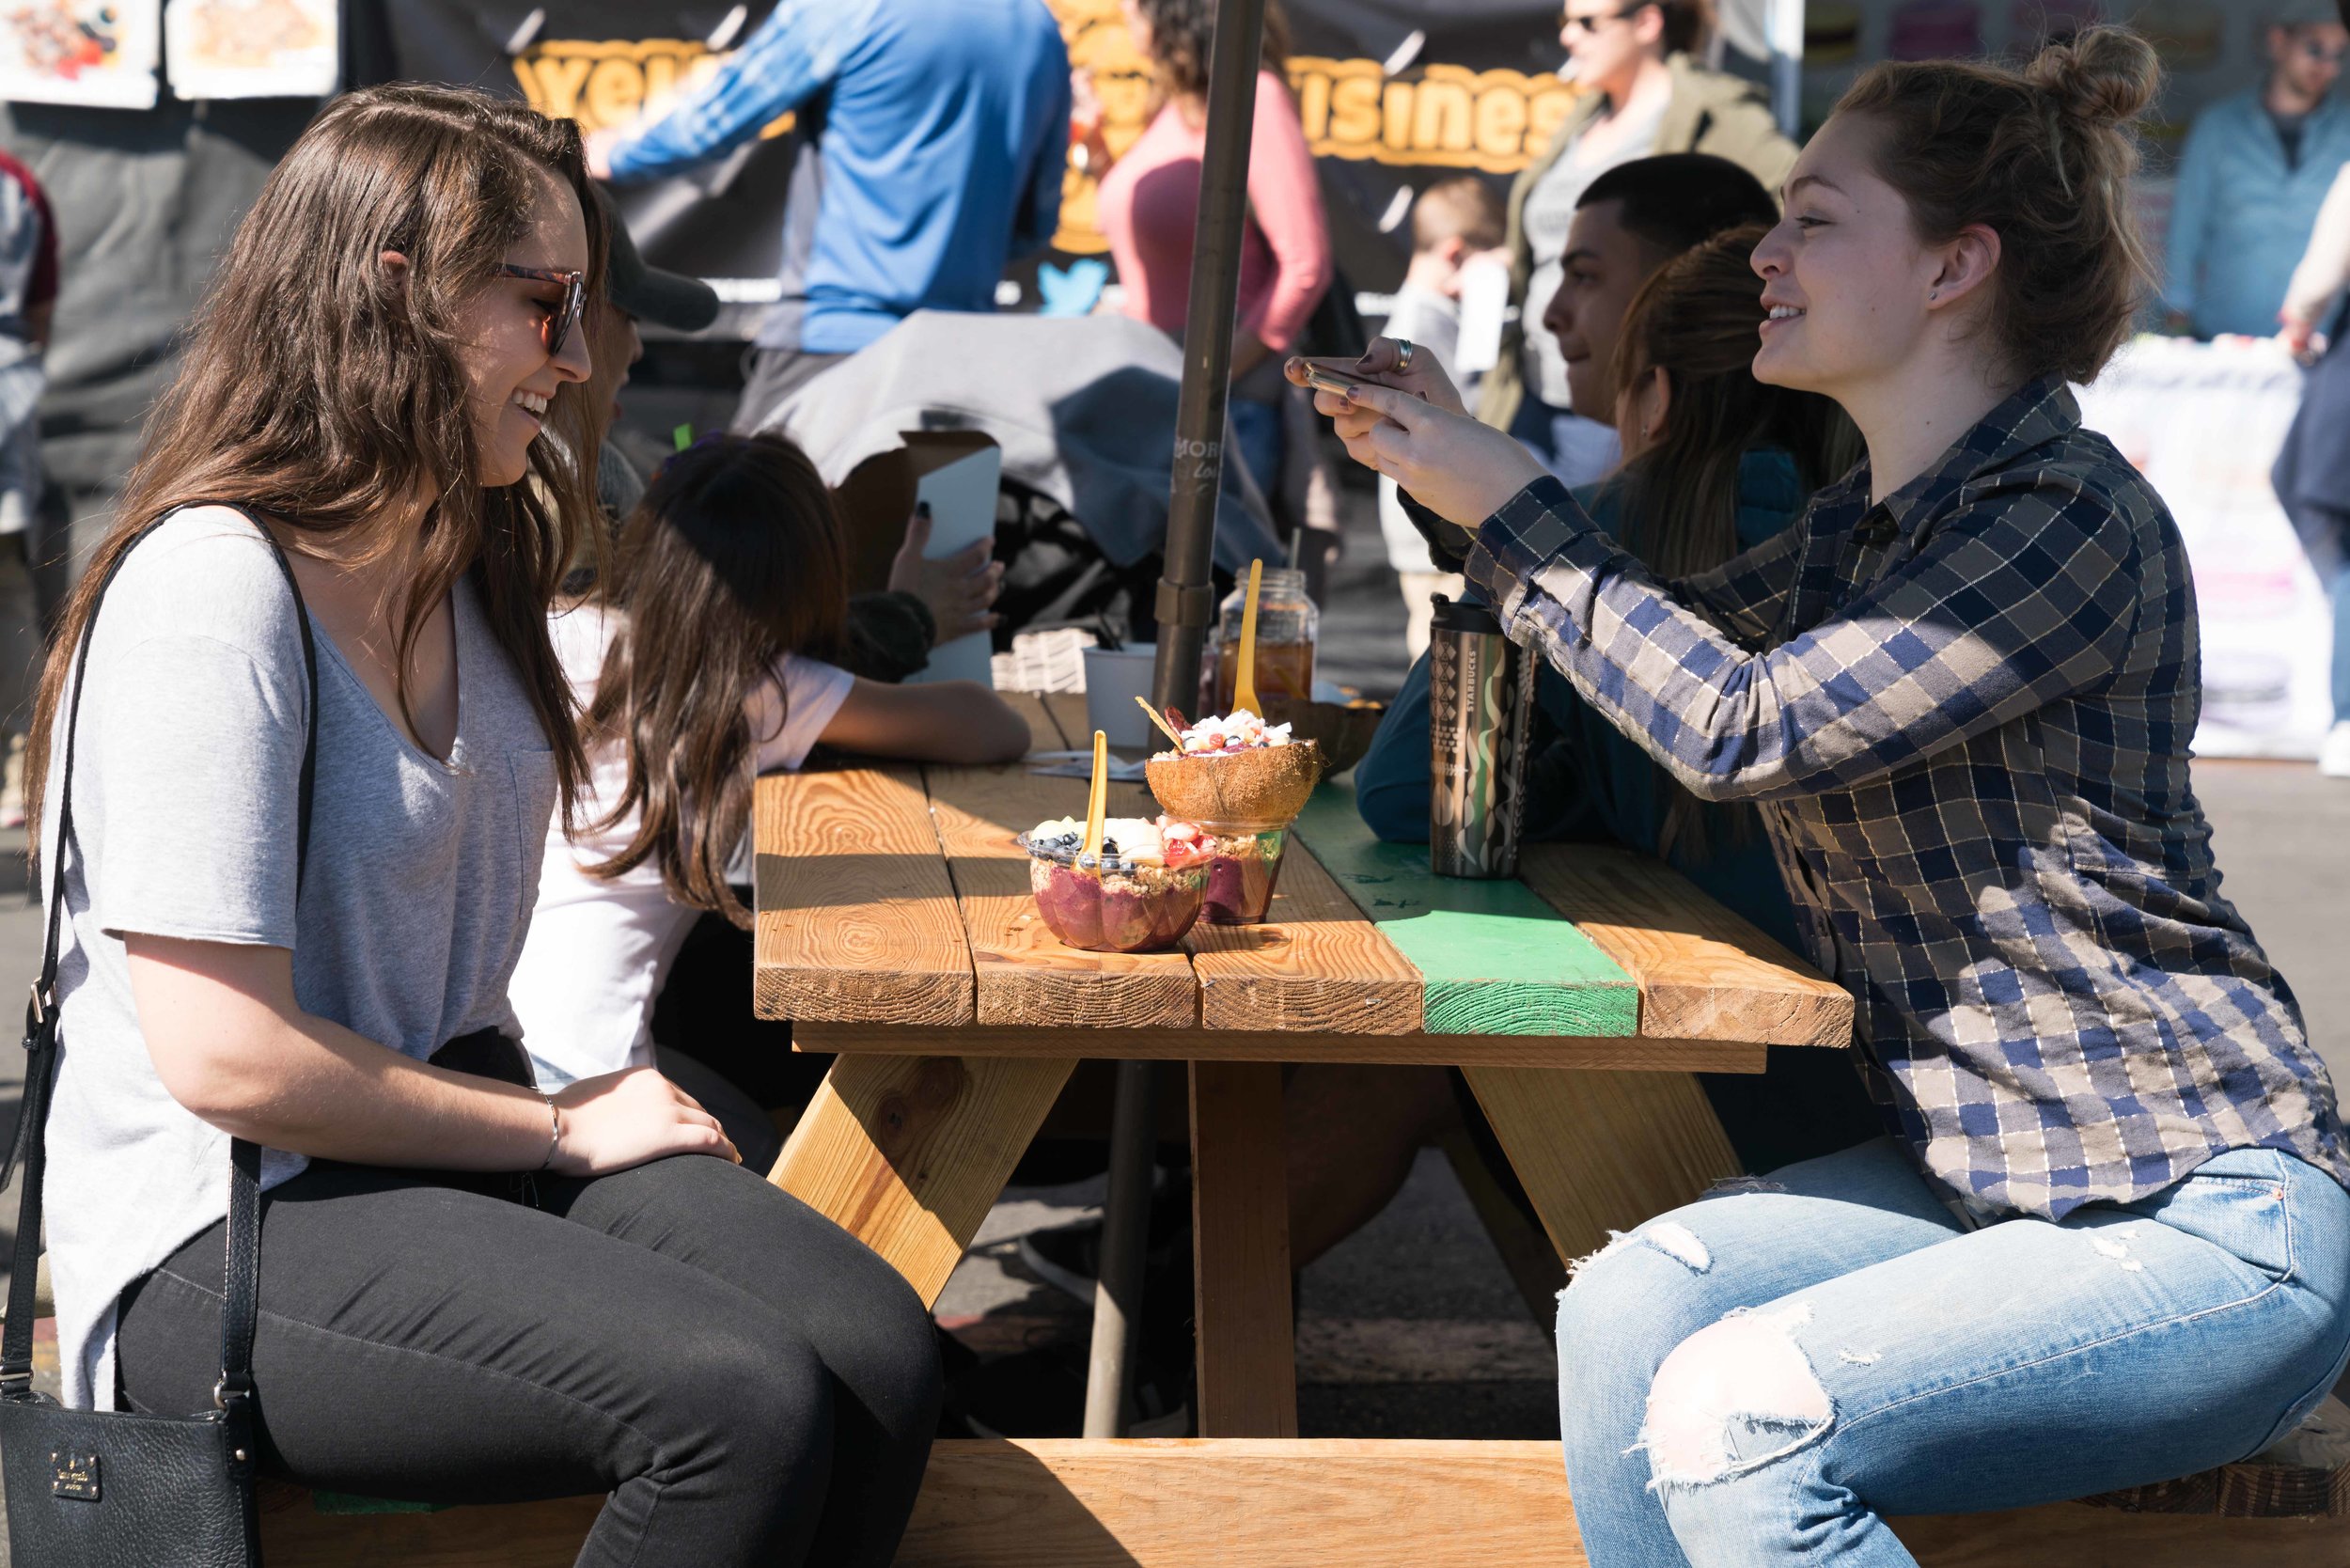  Amanda Slate (right) and Erika VonNovak (left) takes pictures of their coconut bowls from Amazeballs on Sunday, February 25, 2018 at Smorgasburg LA, a weekly food and vendor market on Sundays at Row DTLA. (Photo by Helena Sung) 